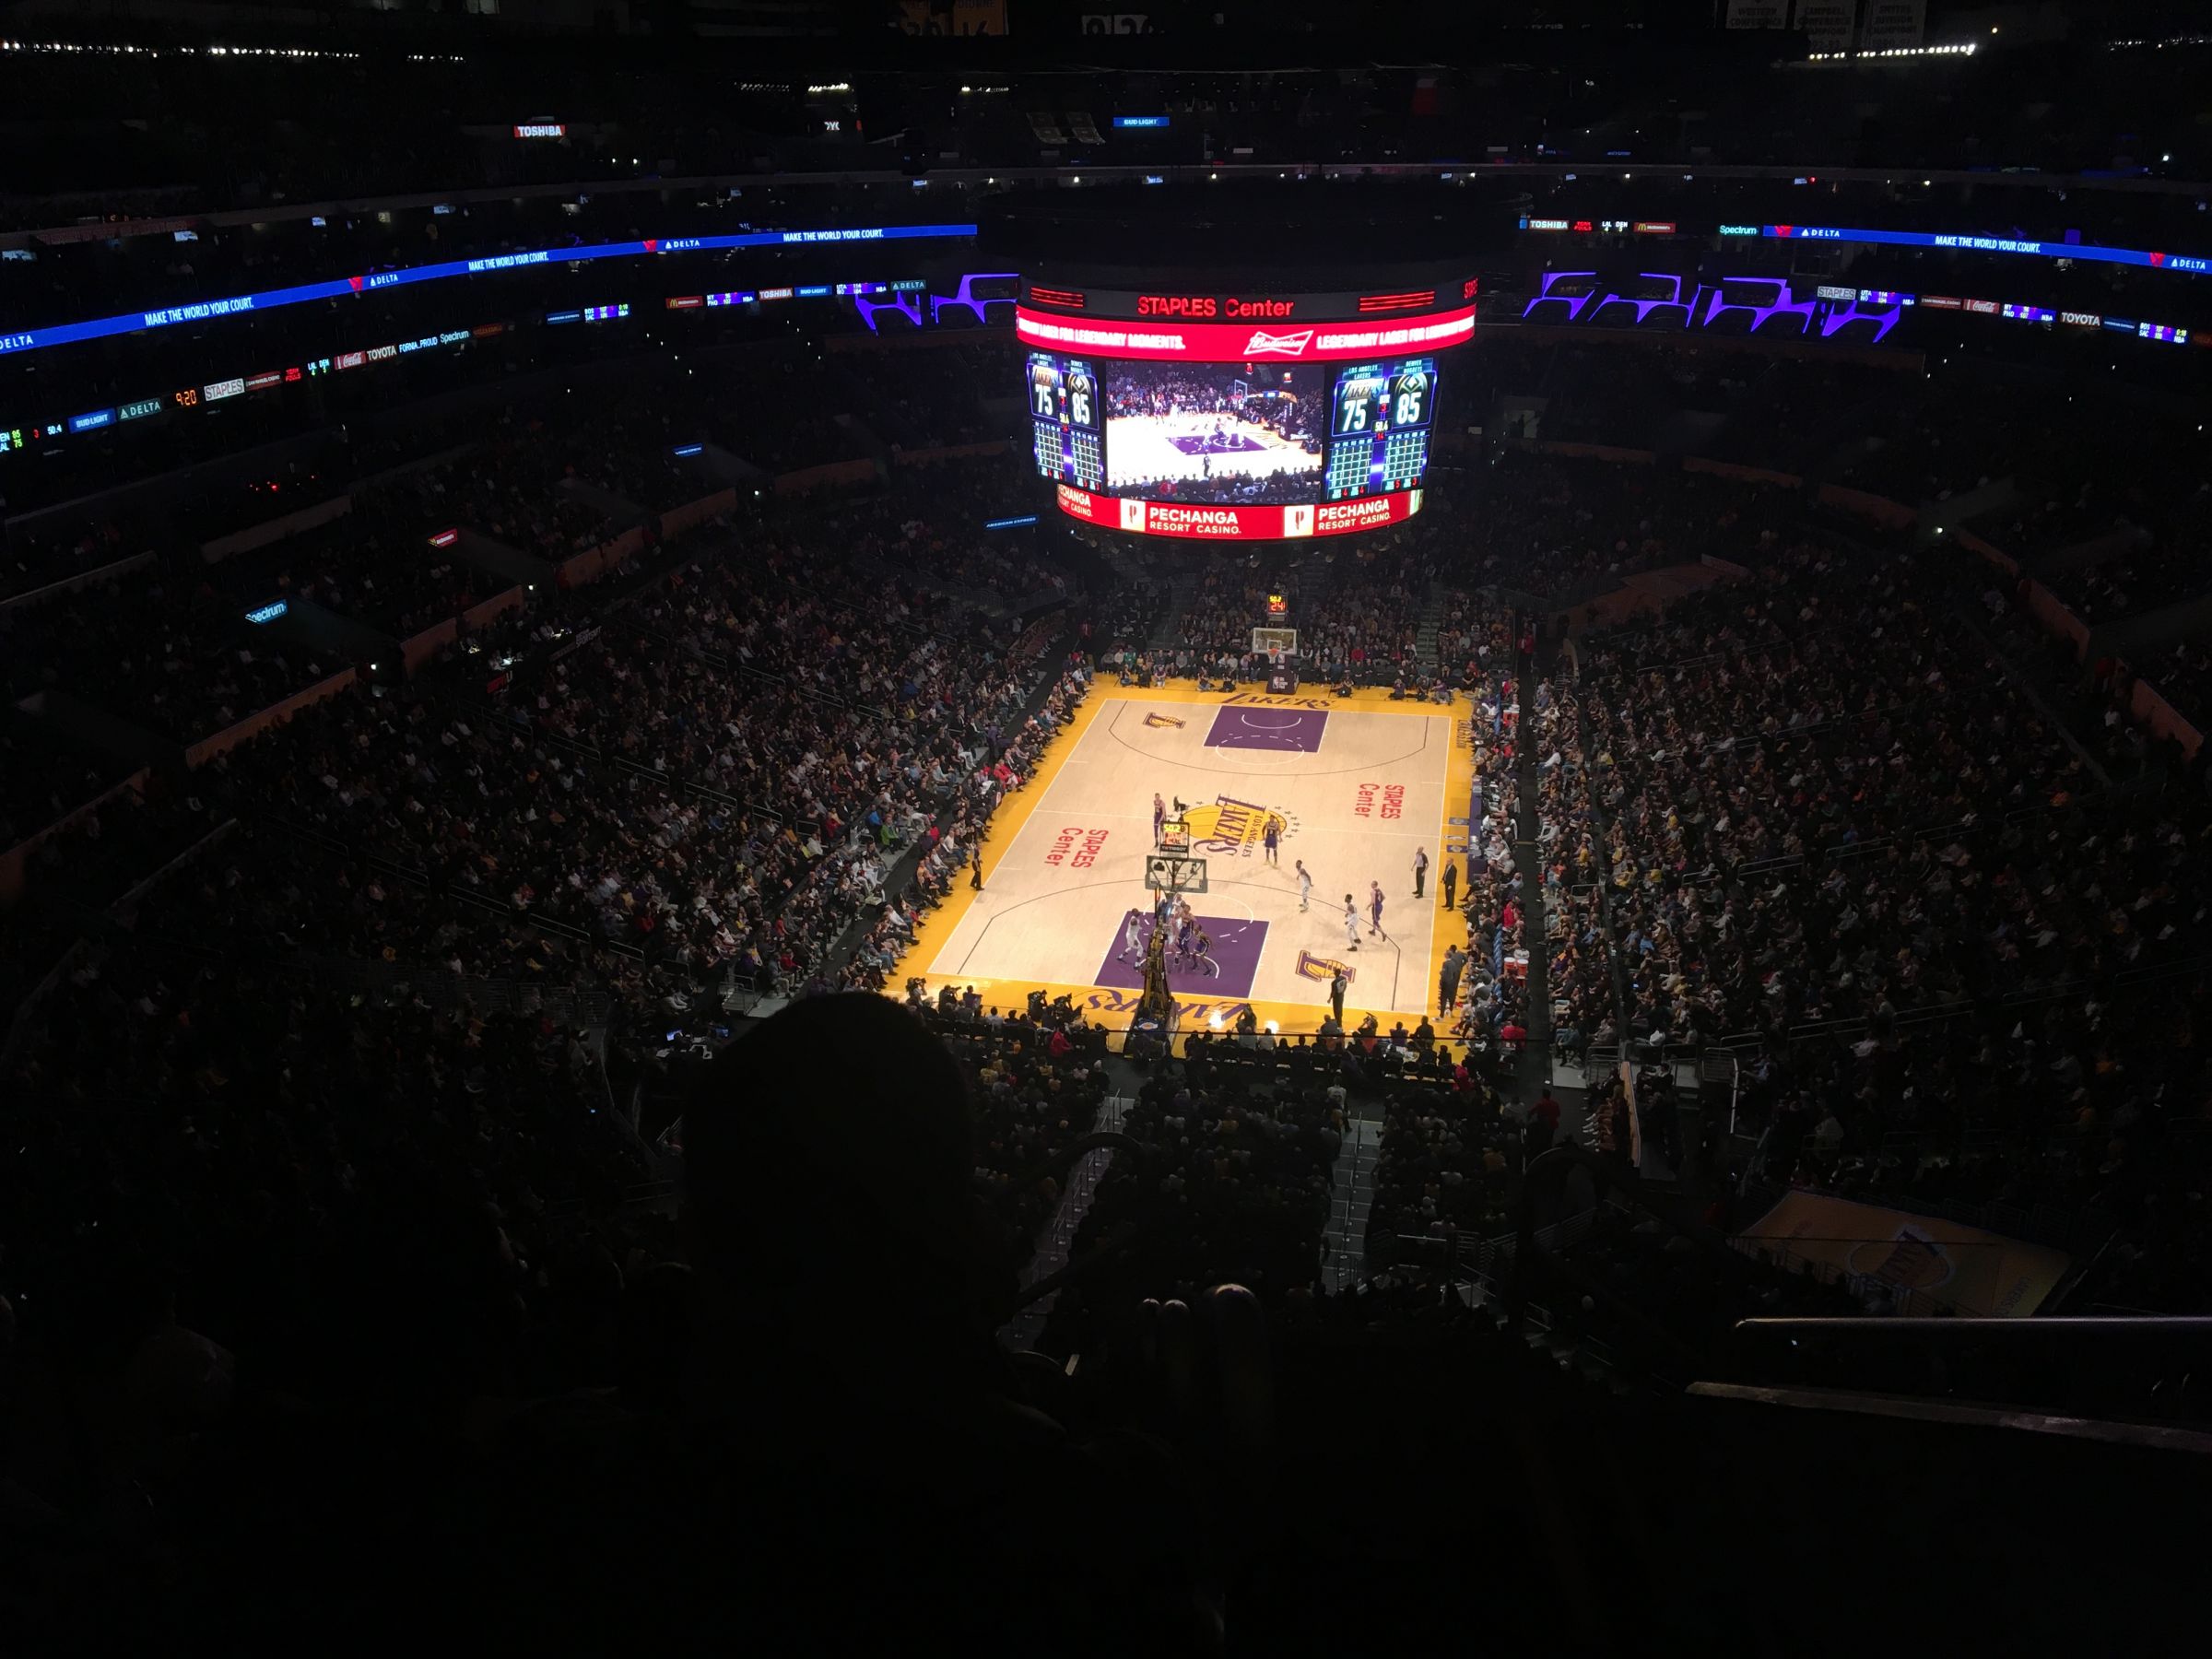 section 309, row 10 seat view  for basketball - crypto.com arena